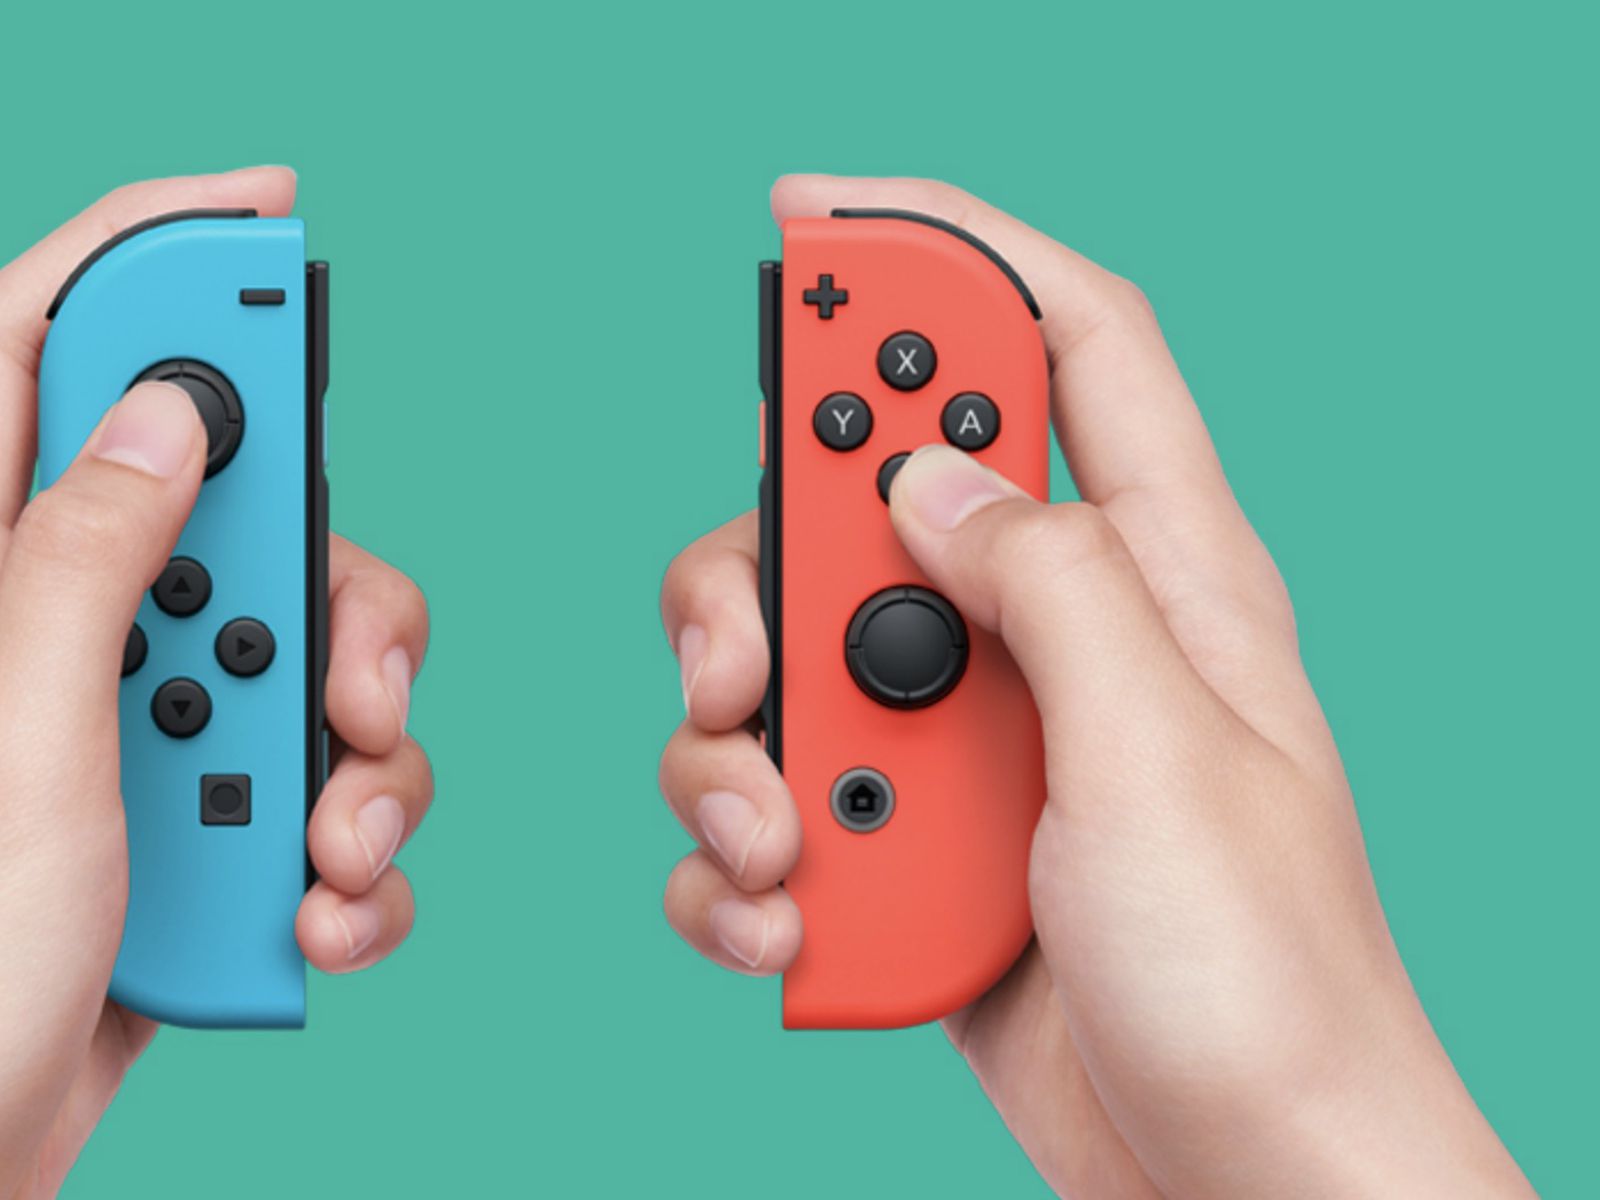 iOS 16 Adds Support for Nintendo Switch's Joy-Cons and Pro